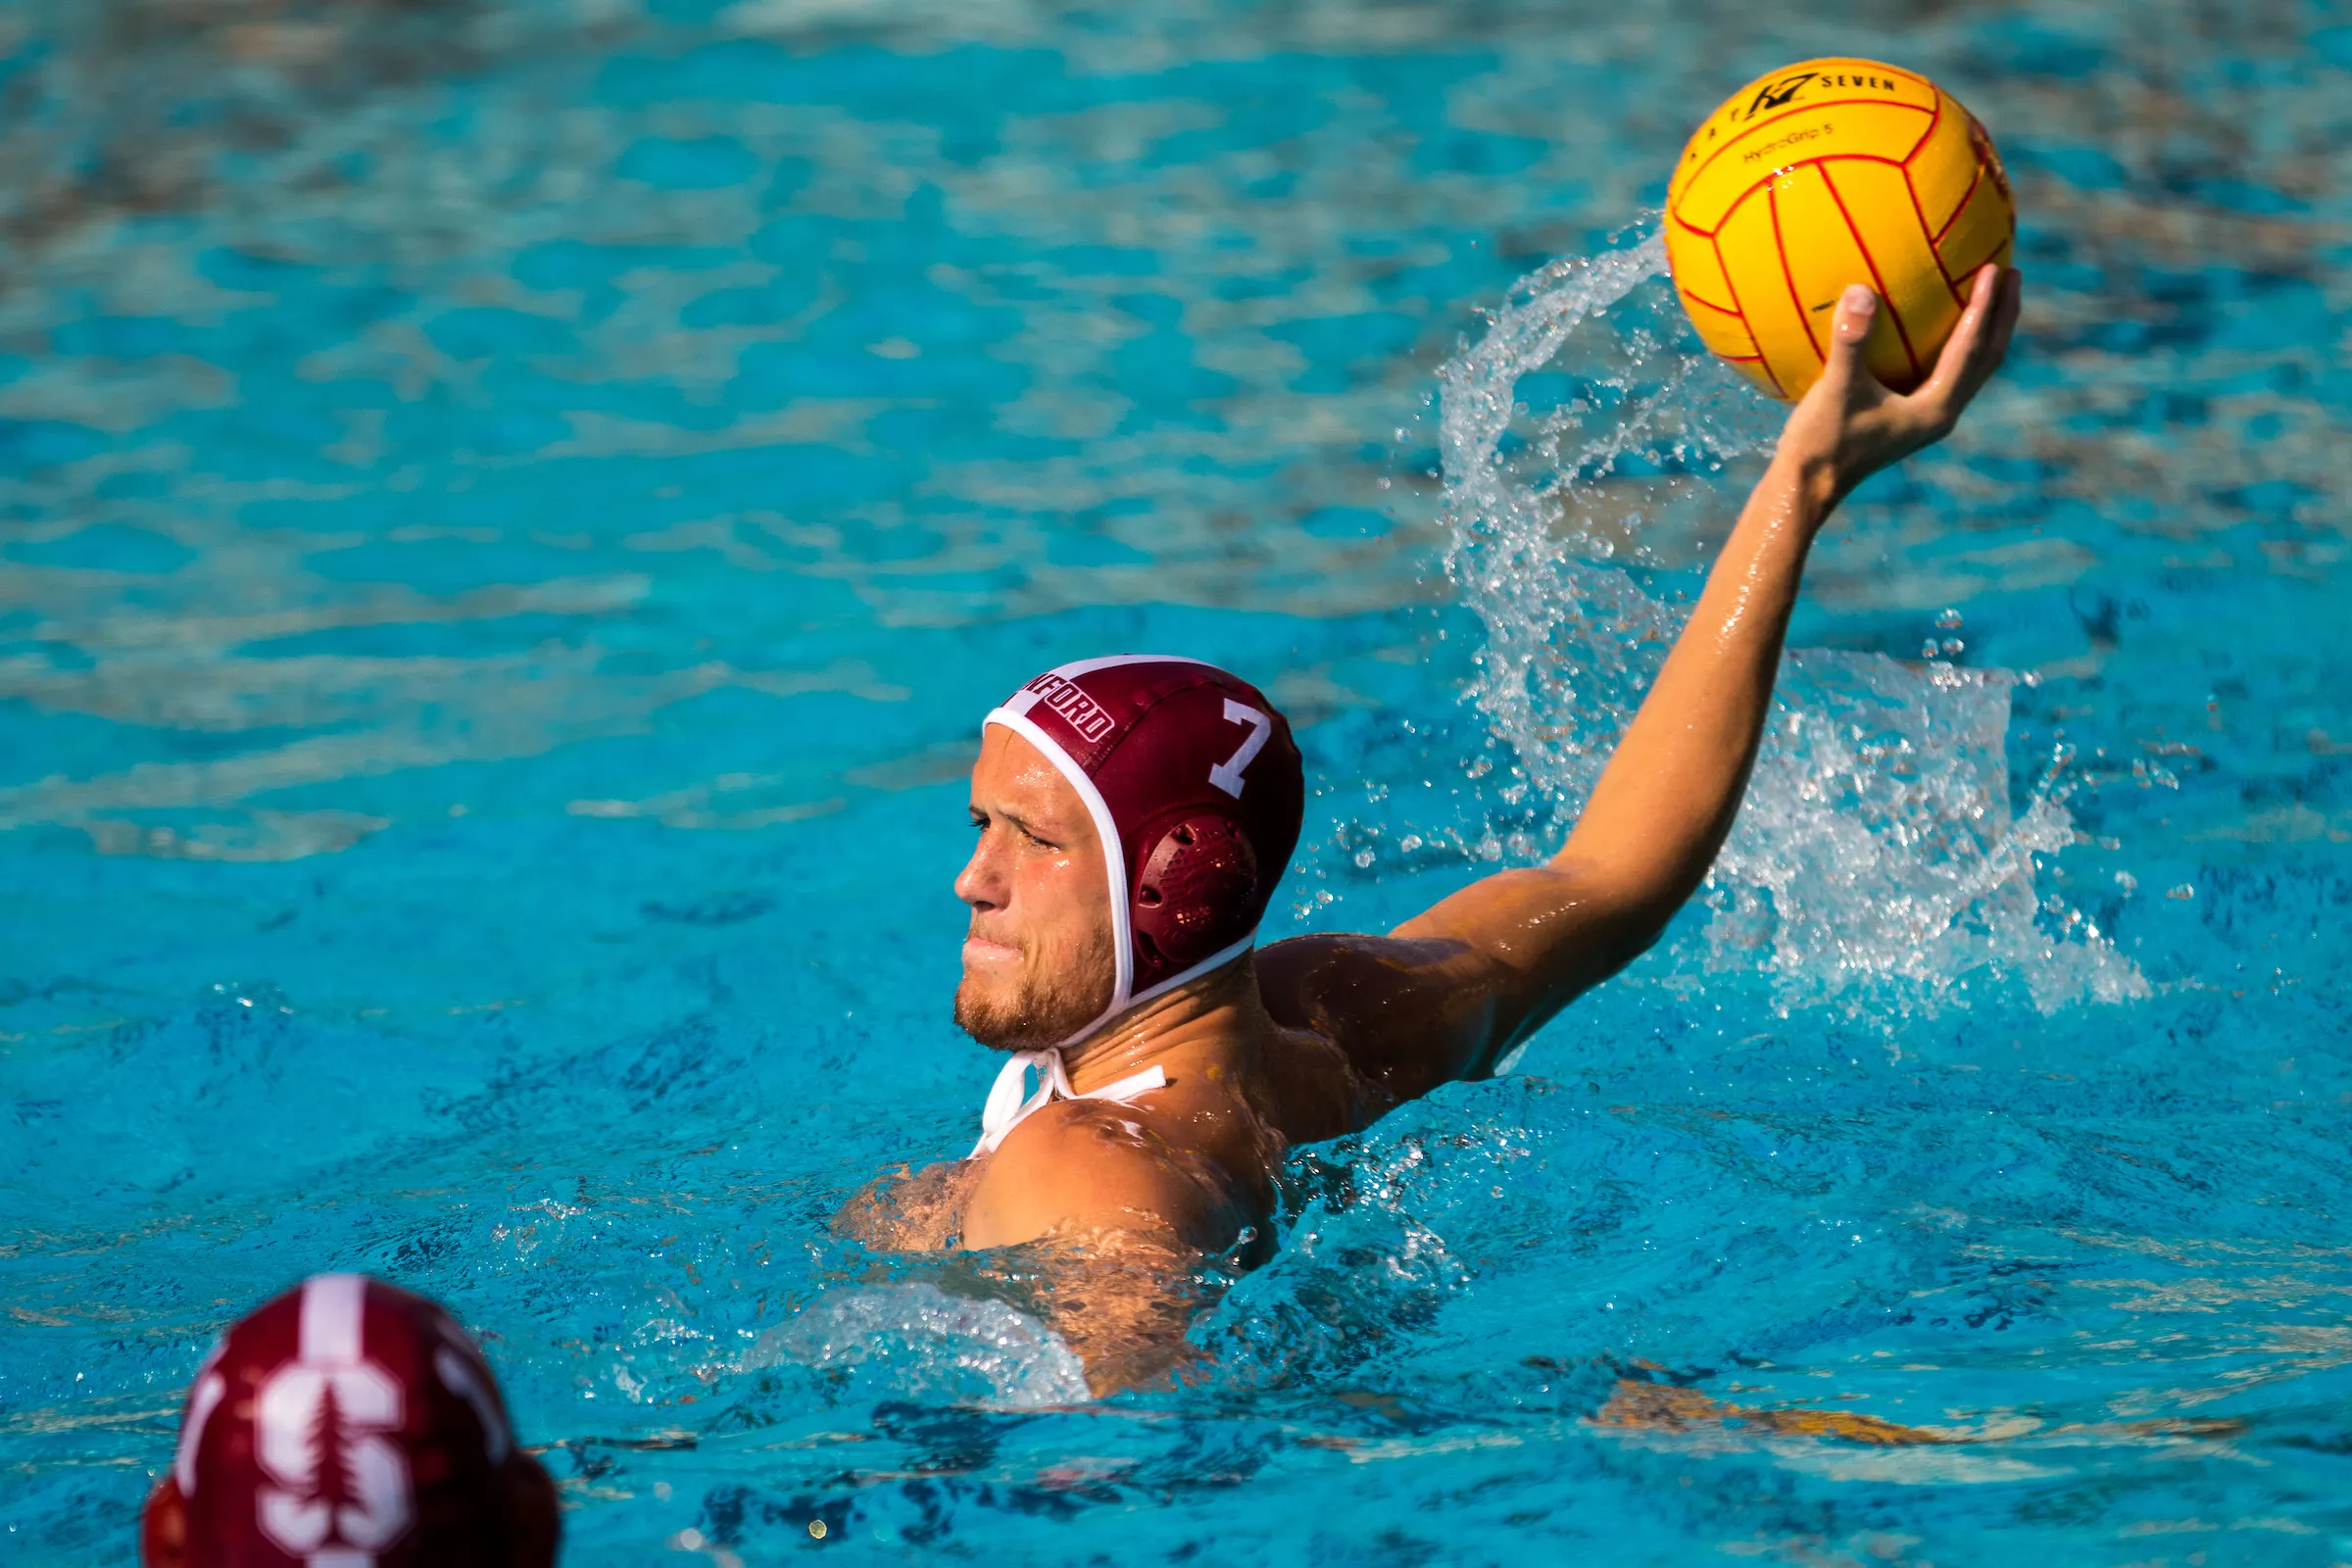 Water polo hosts No. 3 UCLA on Senior Day.